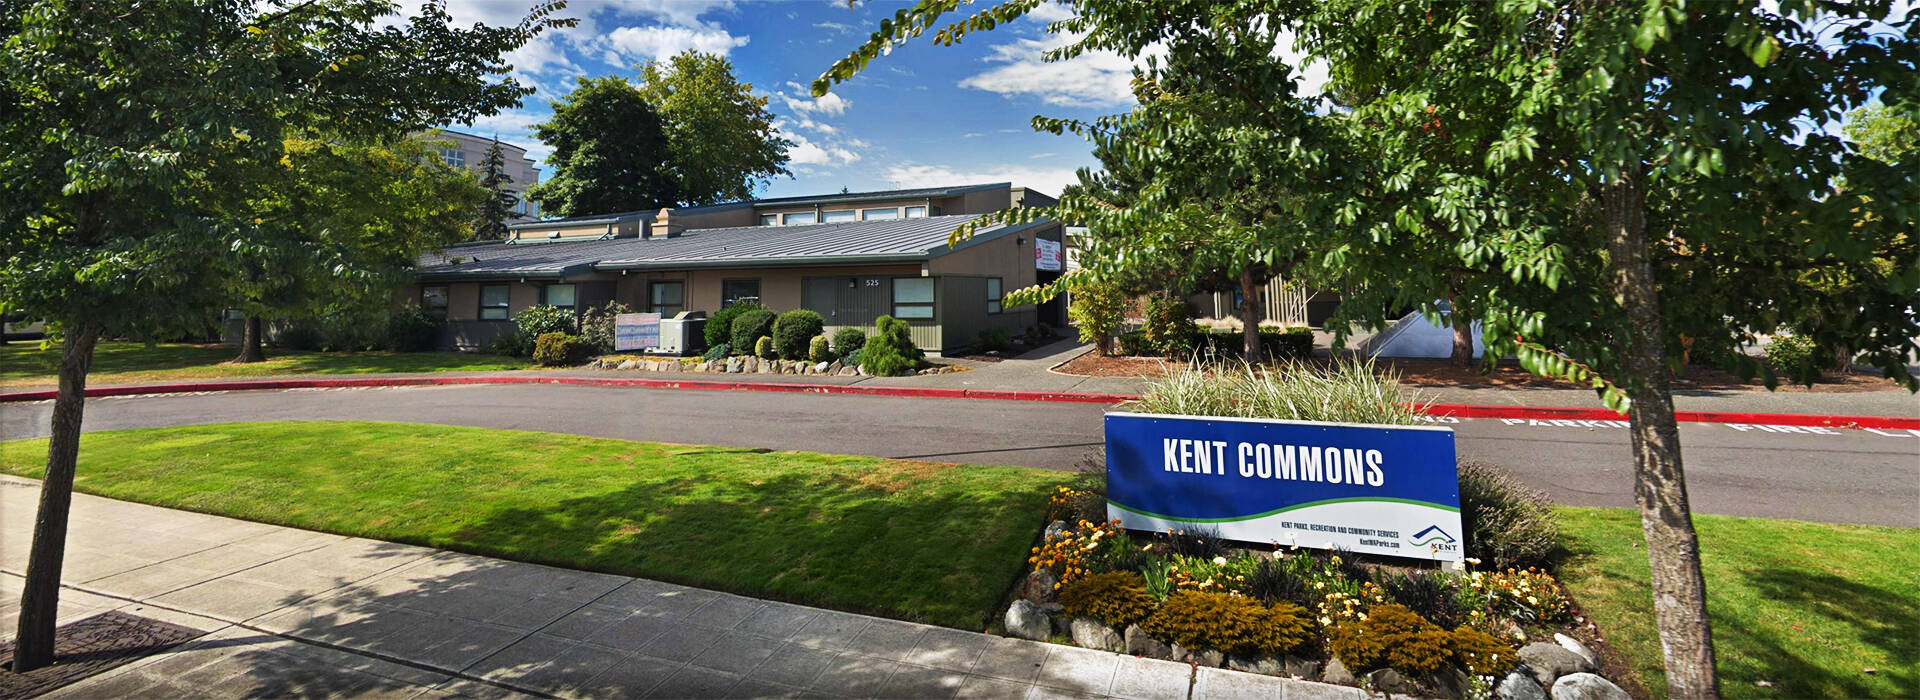 Kent Commons will receive an $1.5 million upgrade over the next six months. COURTESY PHOTO, City of Kent